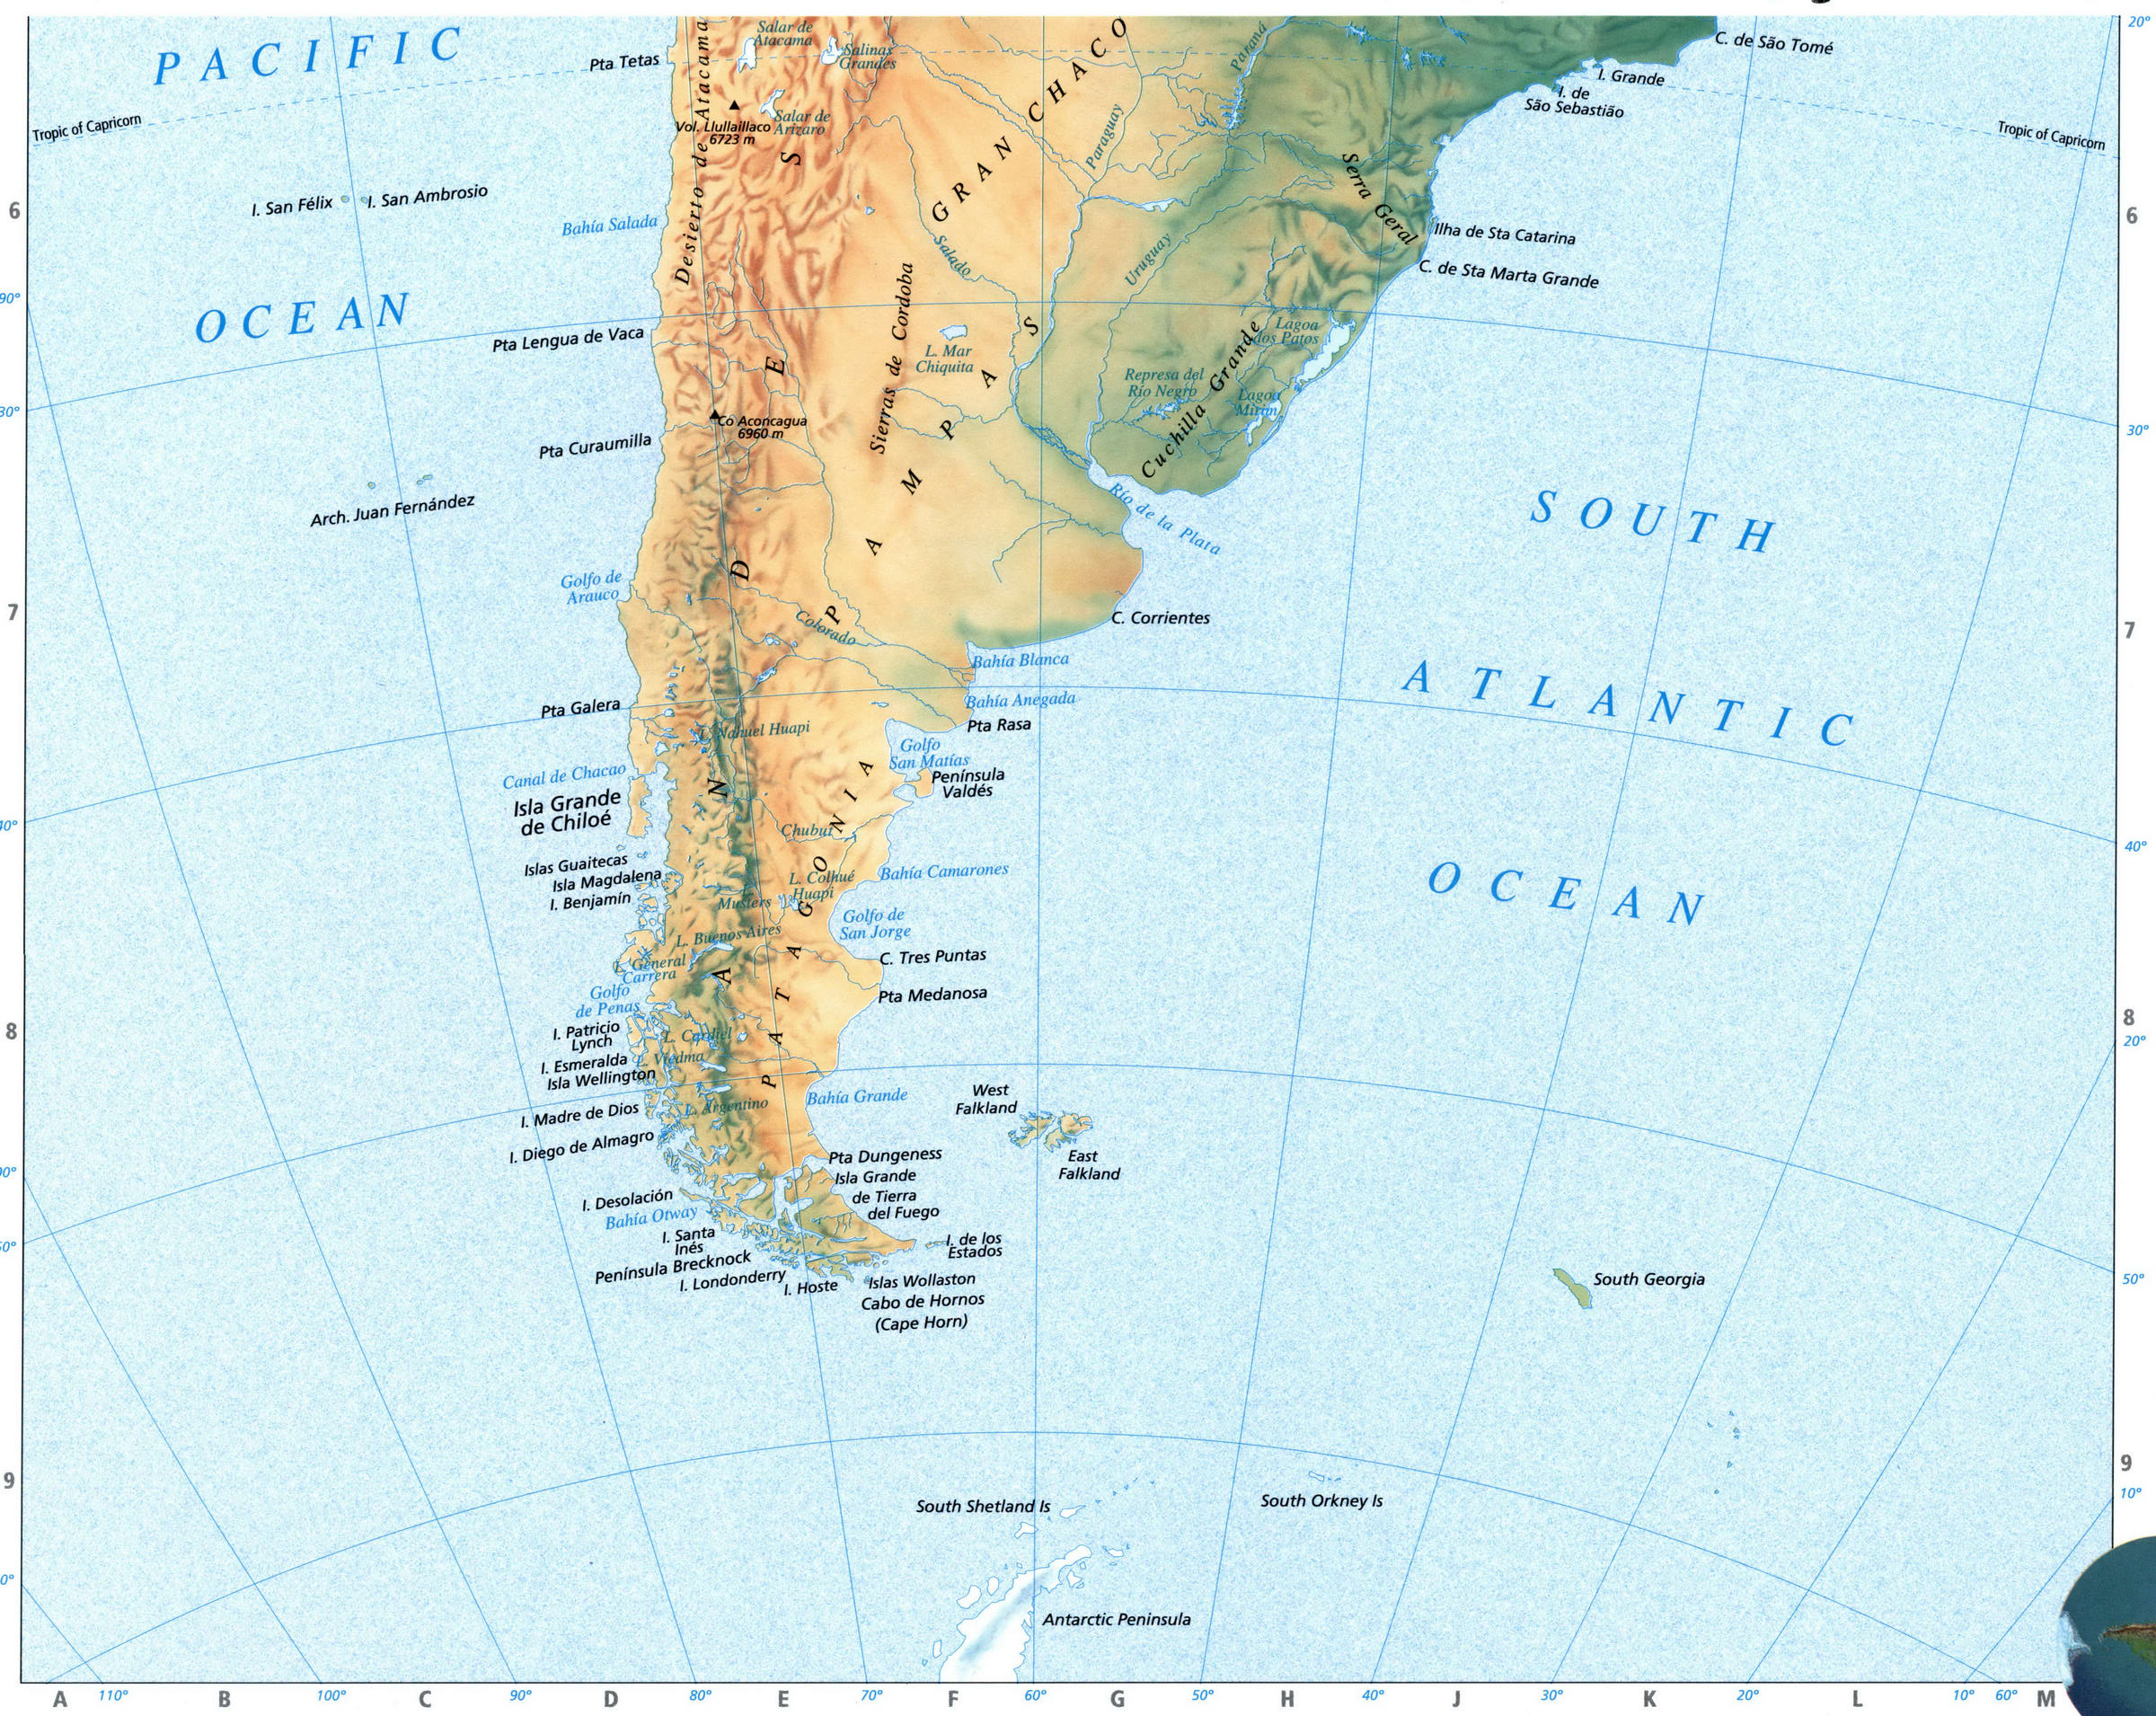 Geographical map of South America